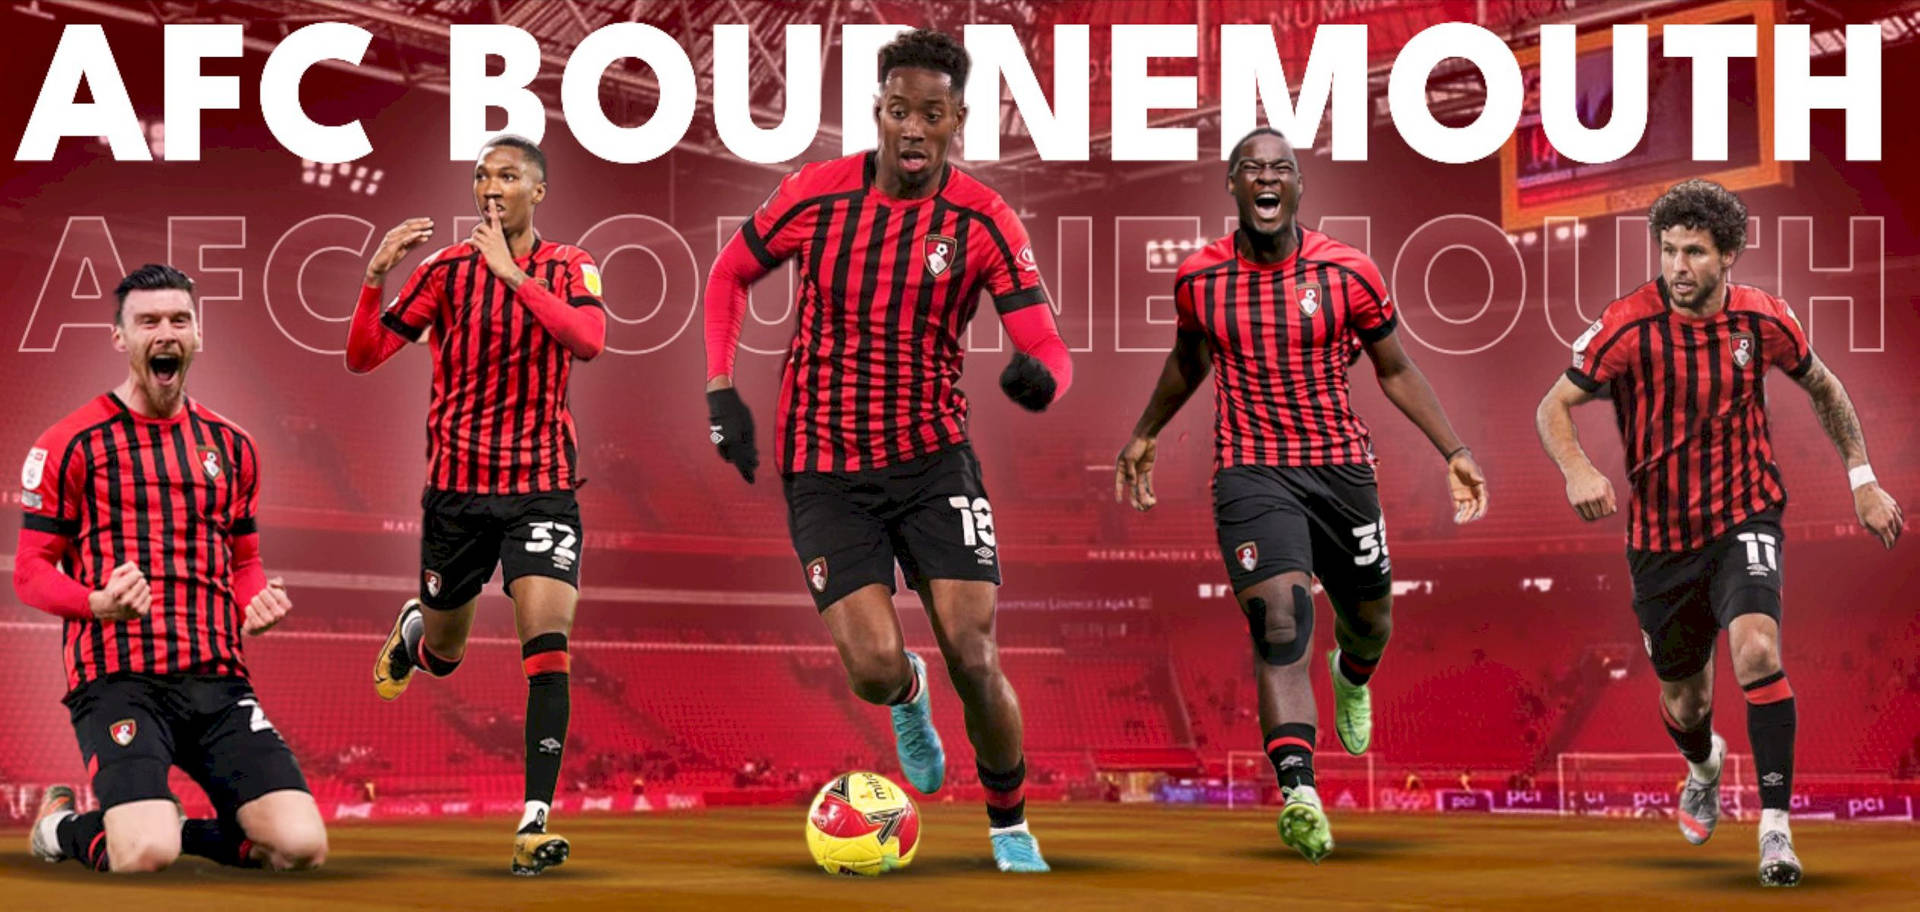 Five AFC Bournemouth Football Players Wallpaper